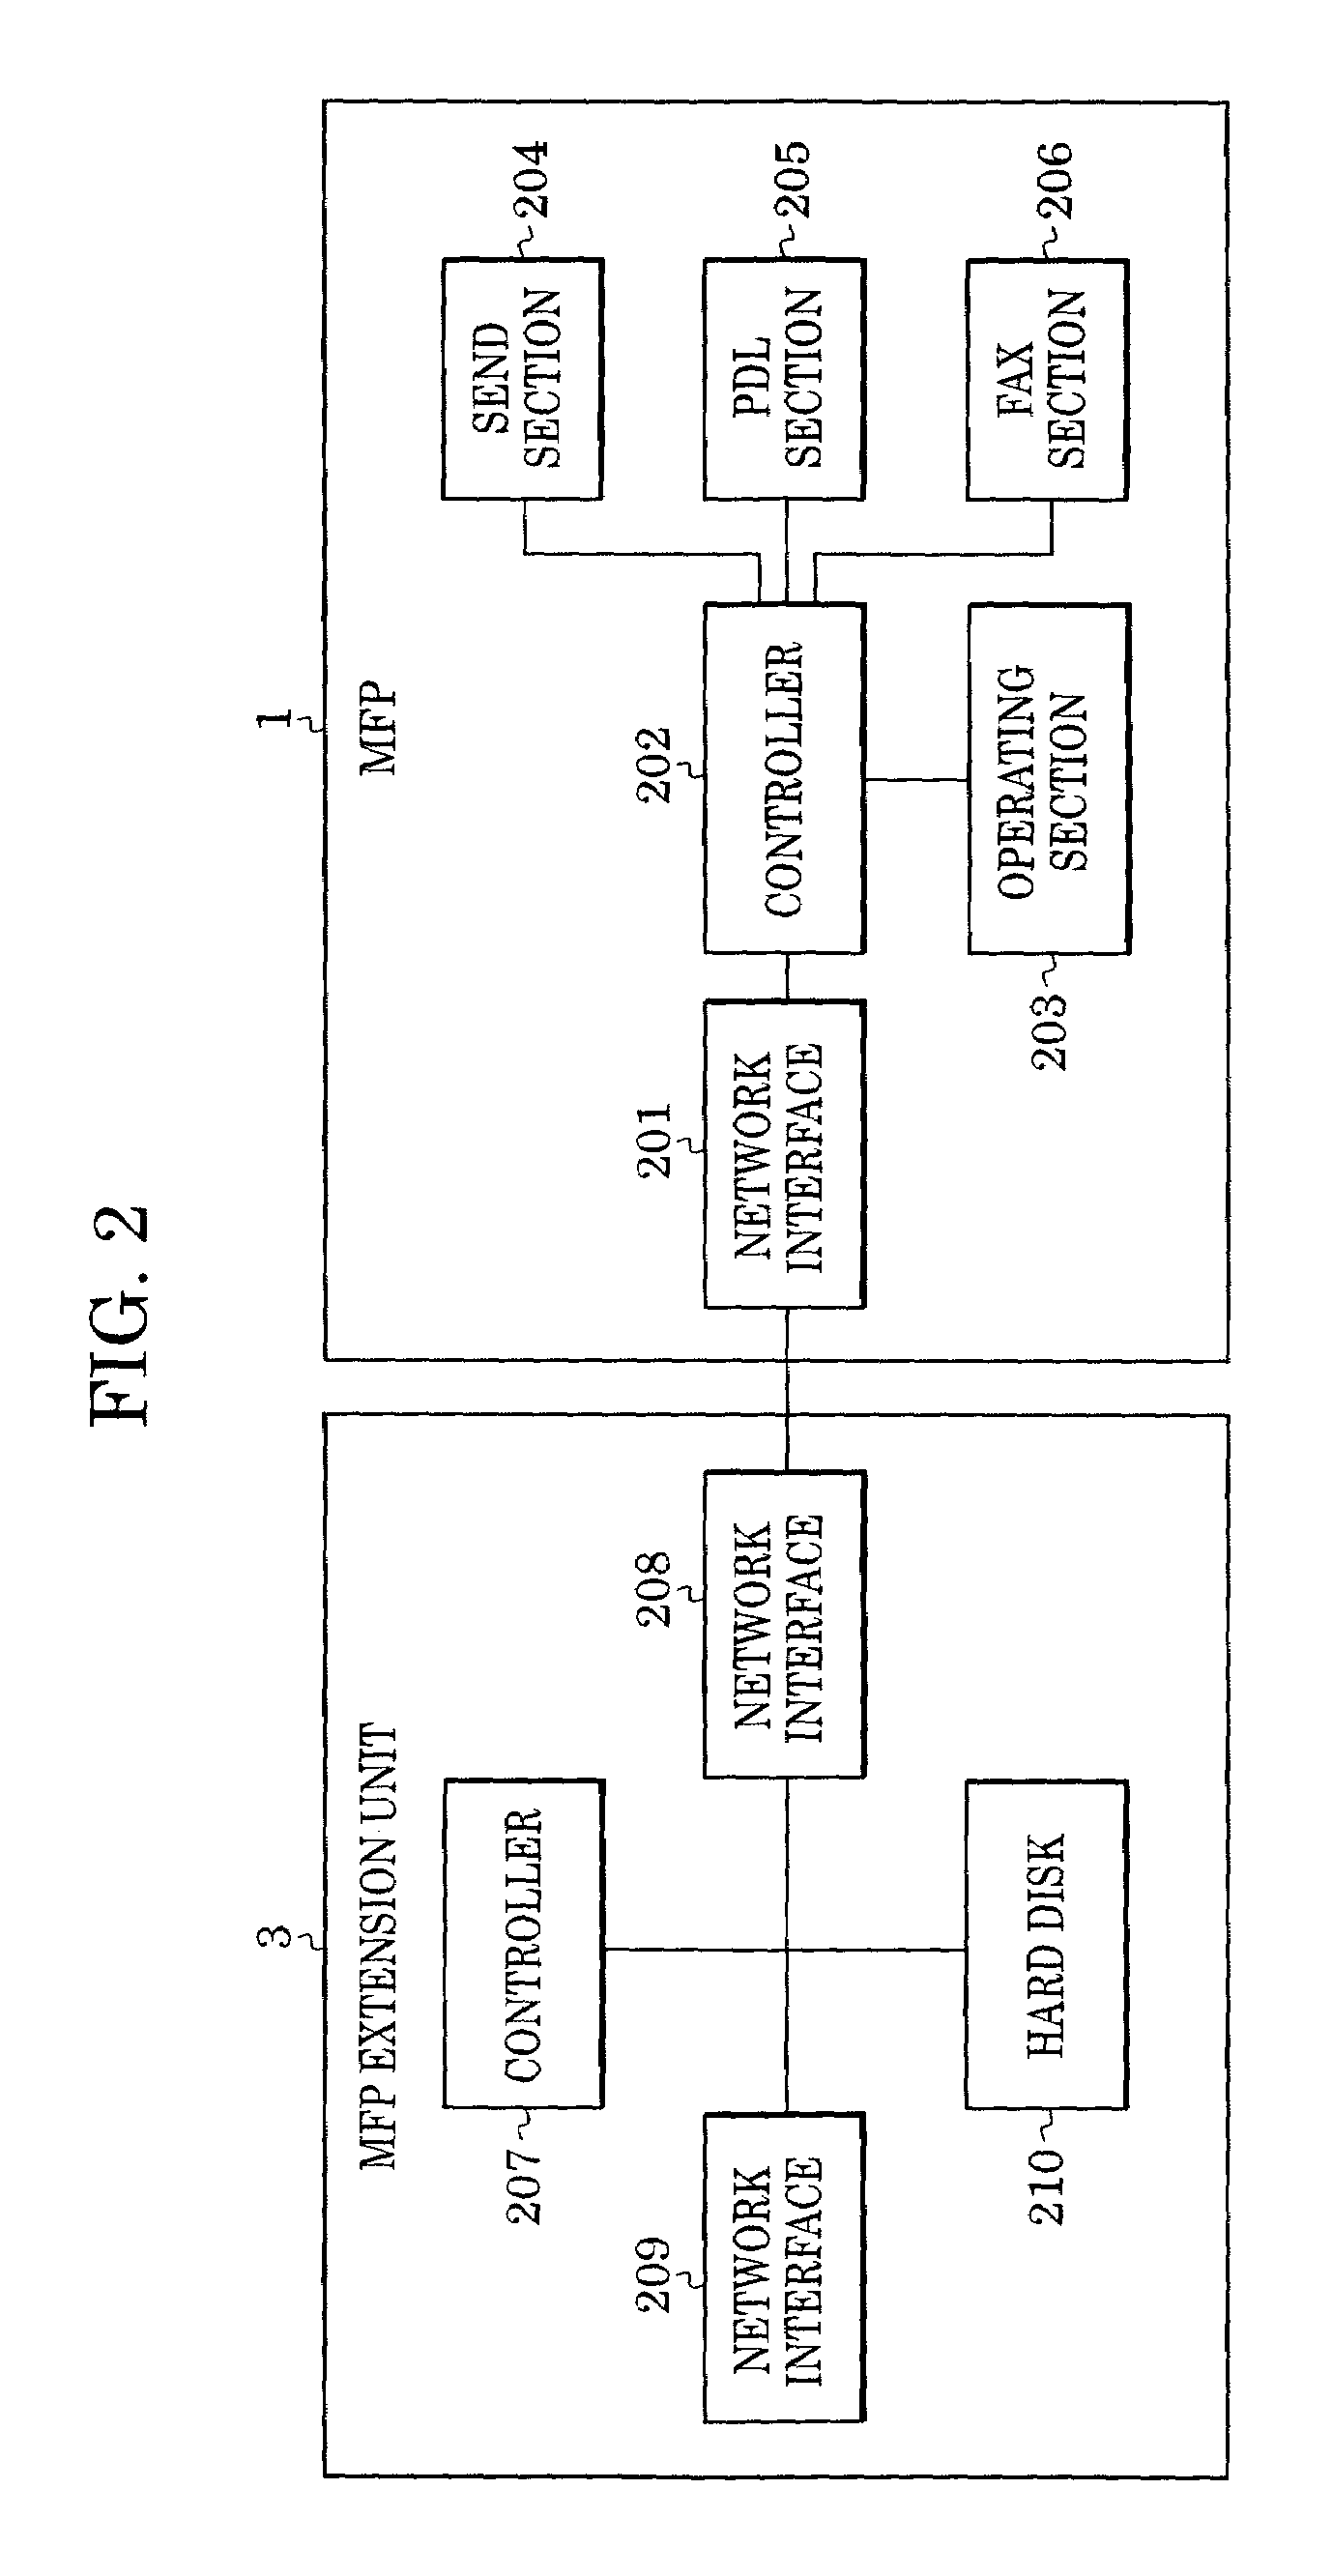 Image processing system and method for processing image data using the system